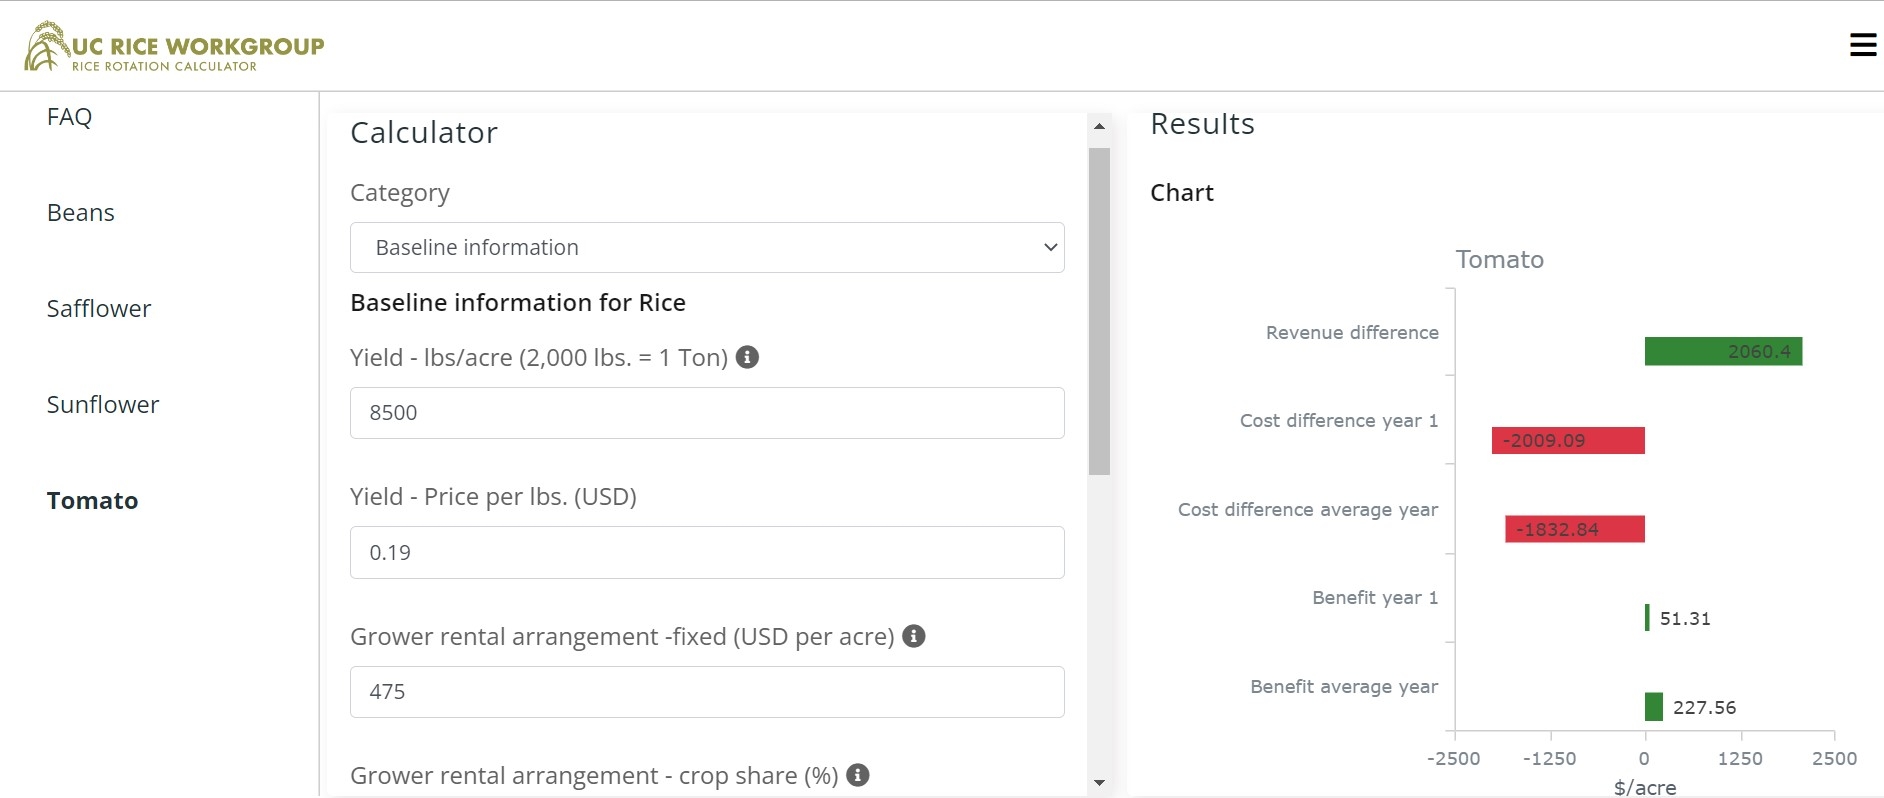 A screenshot of the online tool that allows farmers to enter variables unique to their operation to calculate potential costs and benefits of rotating from rice to dry beans, tomato, sunflower or safflower.